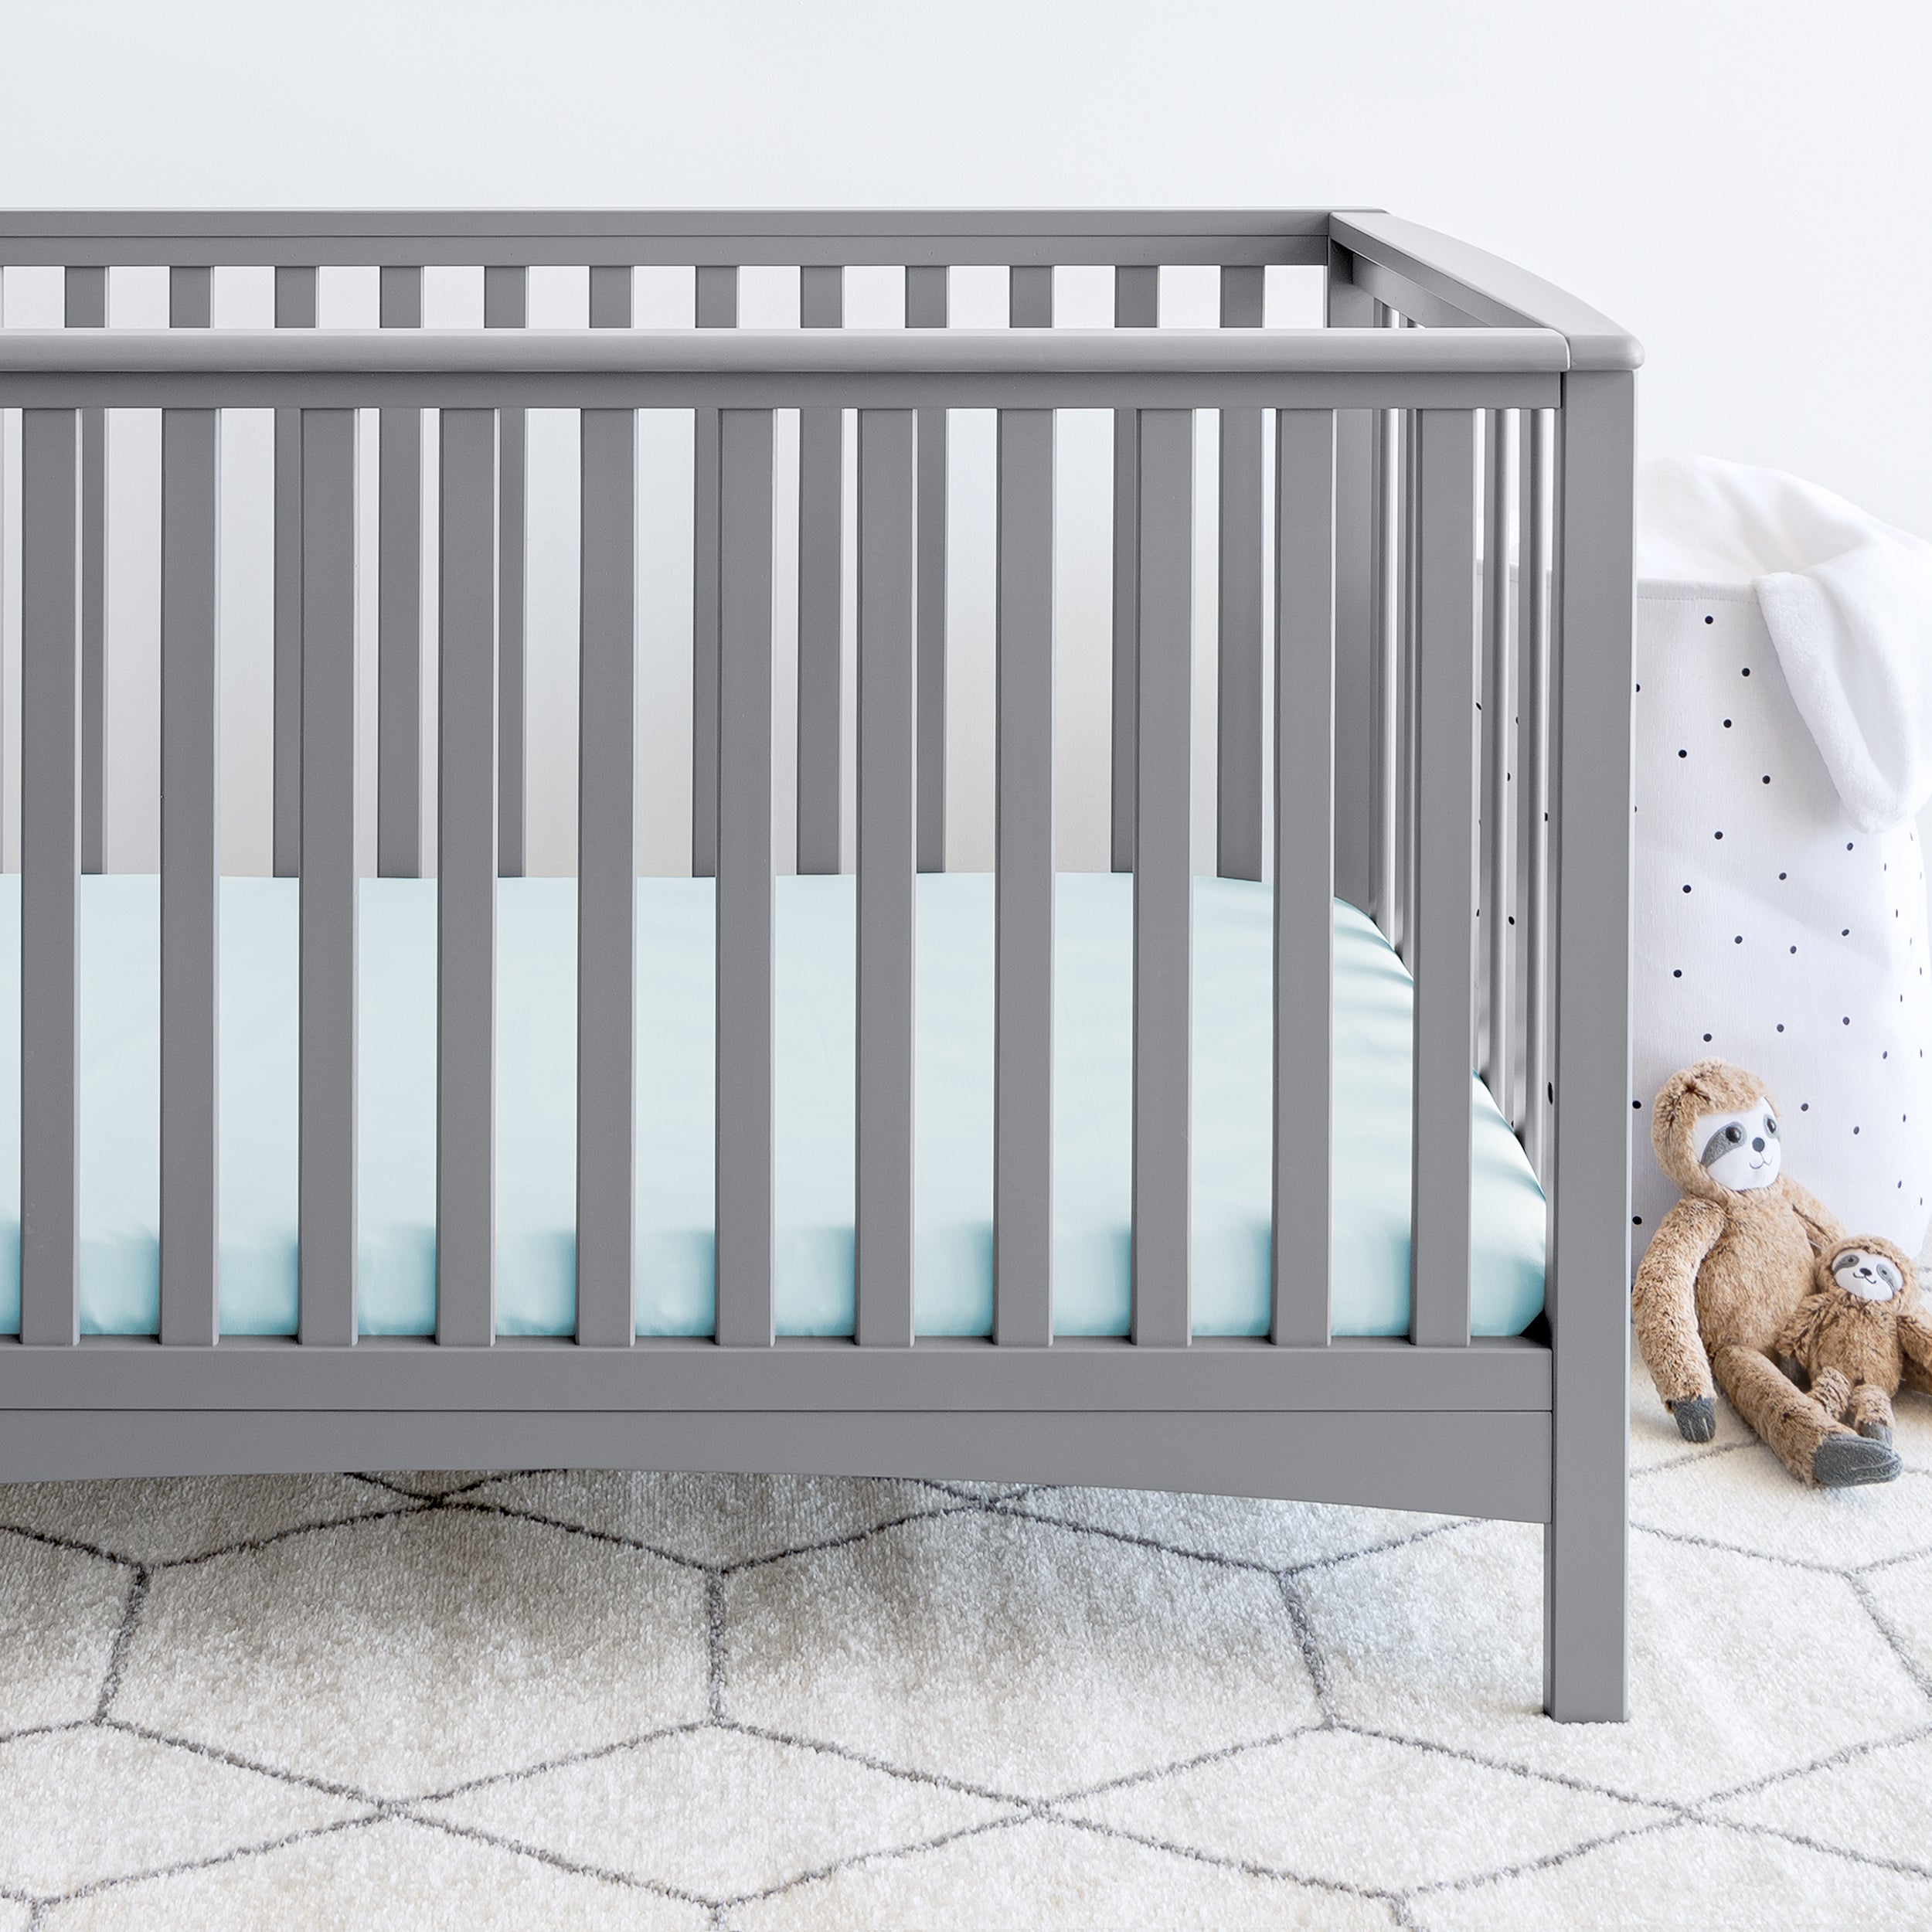 A gray crib on a white printed rug. The crib mattress is cover with a blue fitted sheet. Sloth stuffed animals and a hamper are next to the crib. 